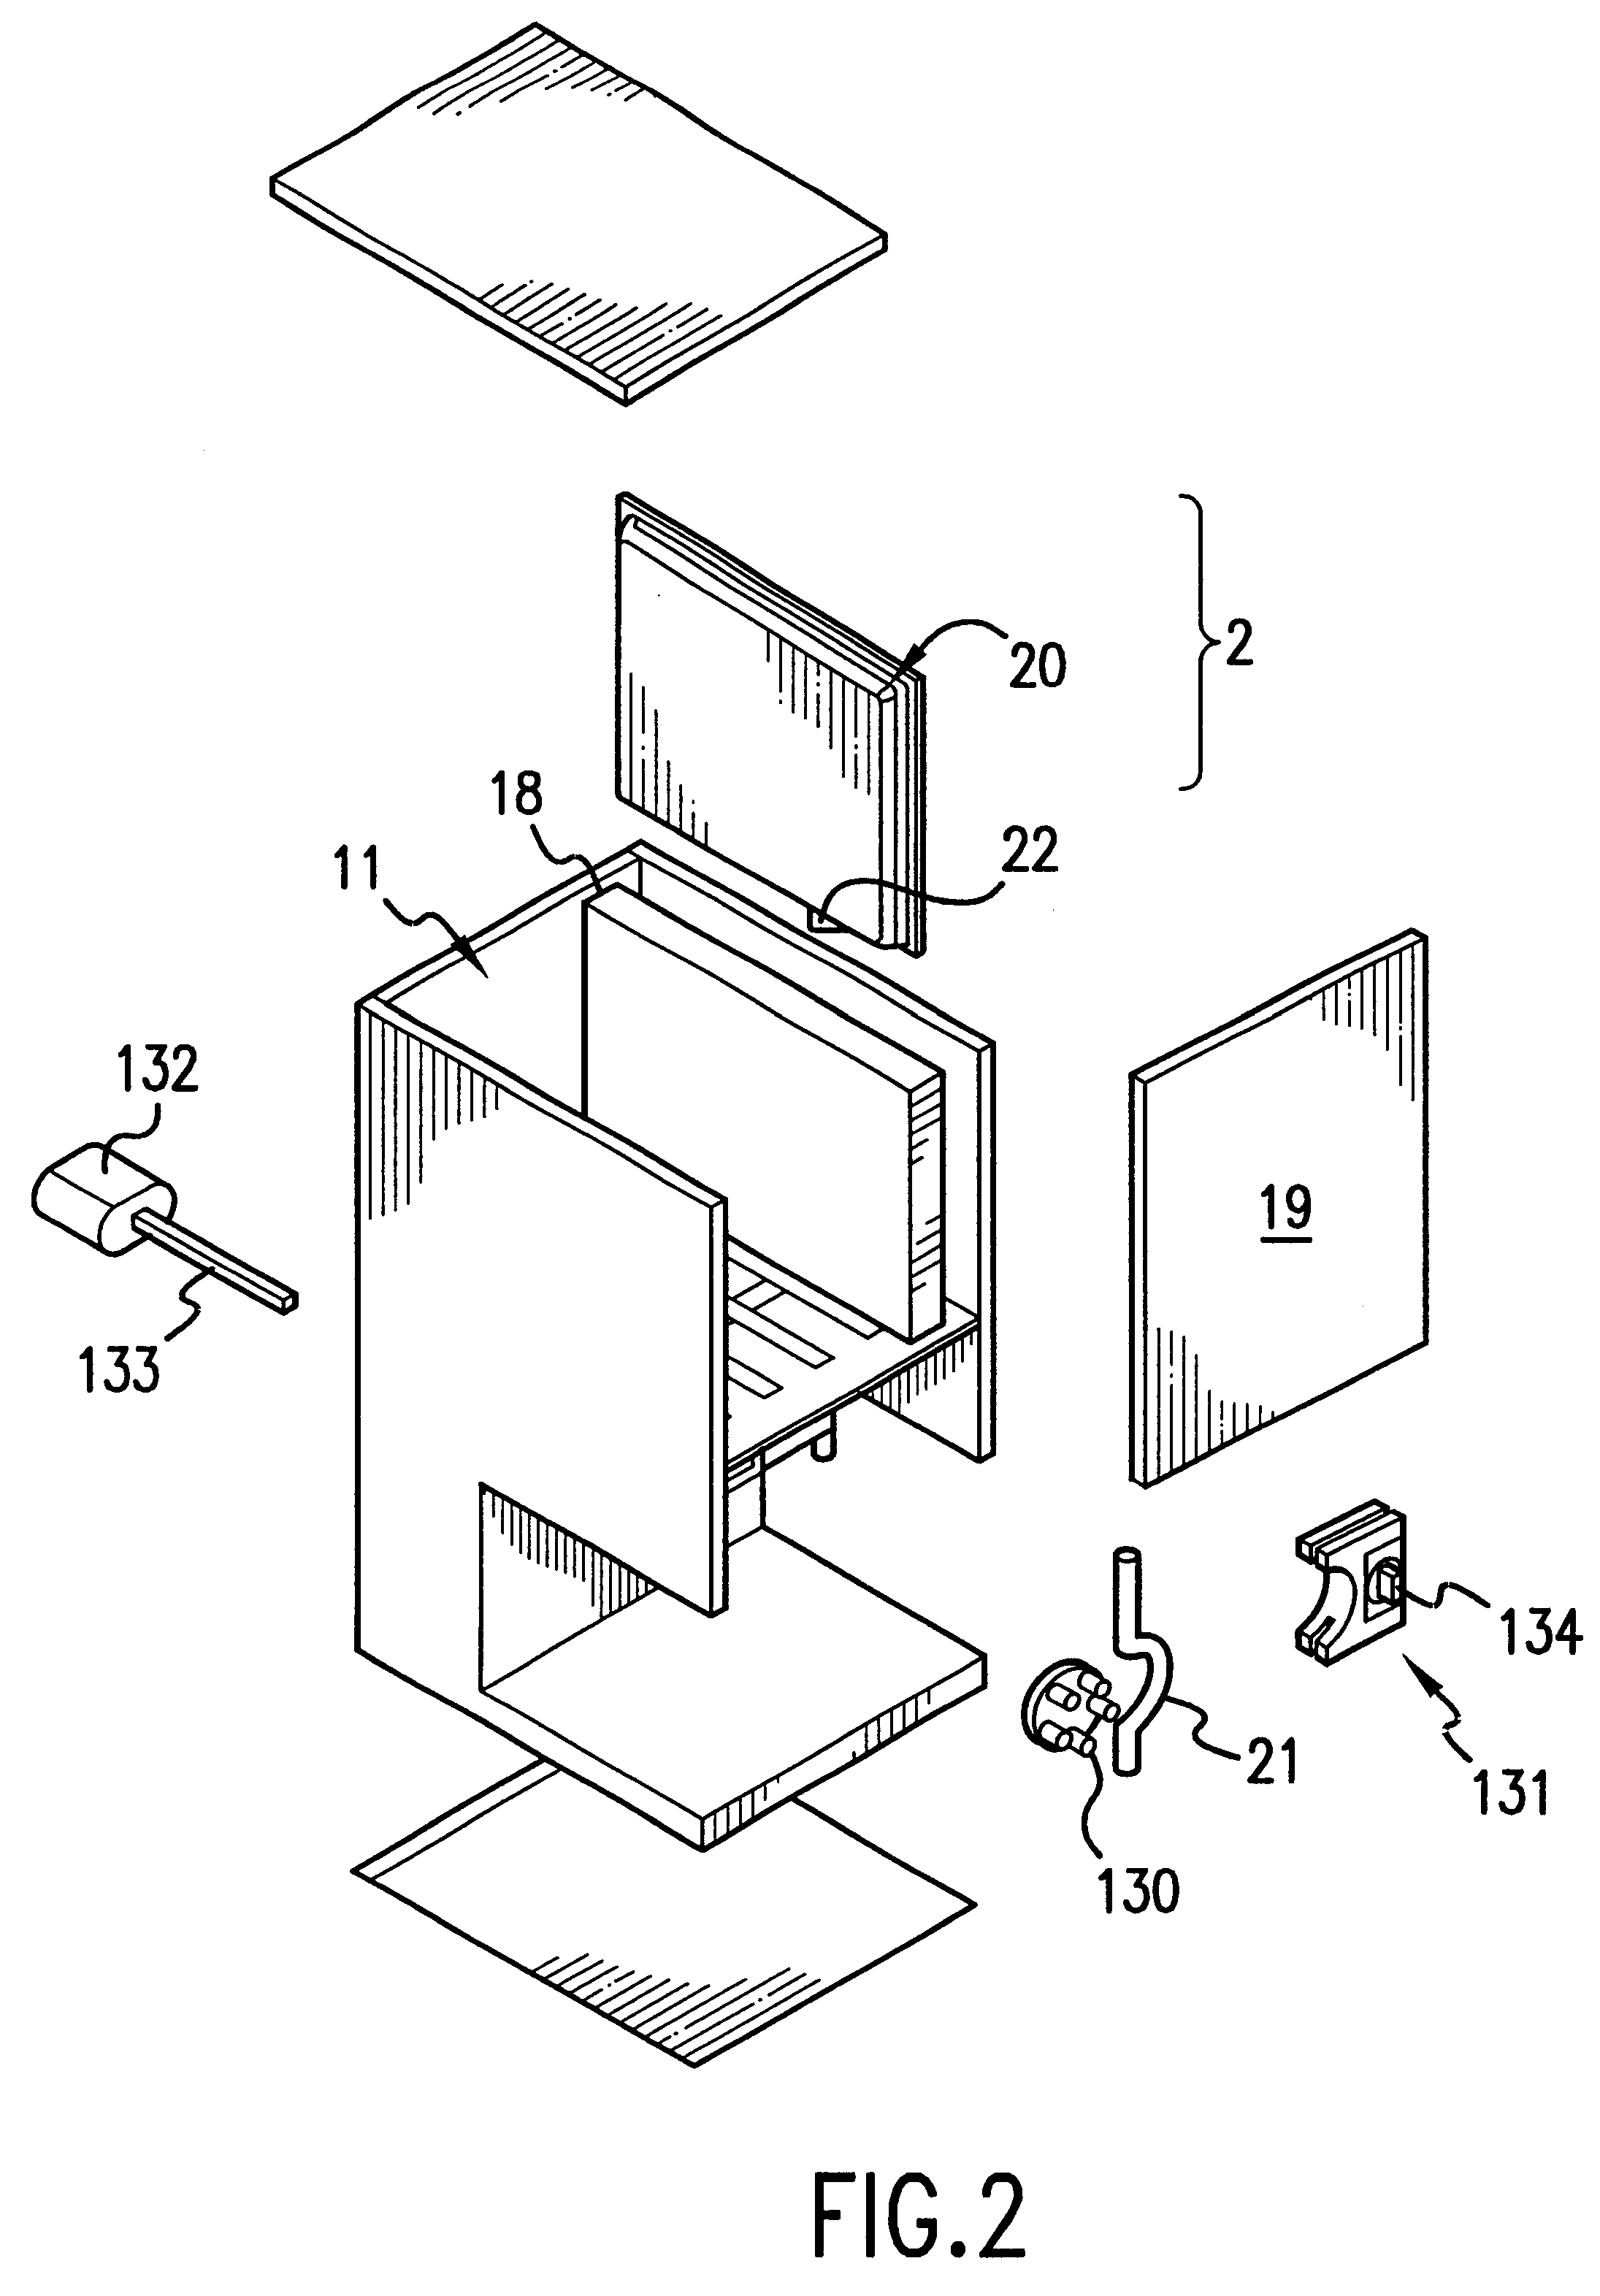 Dispensing device and method for rapidly heating and delivering a flowable product